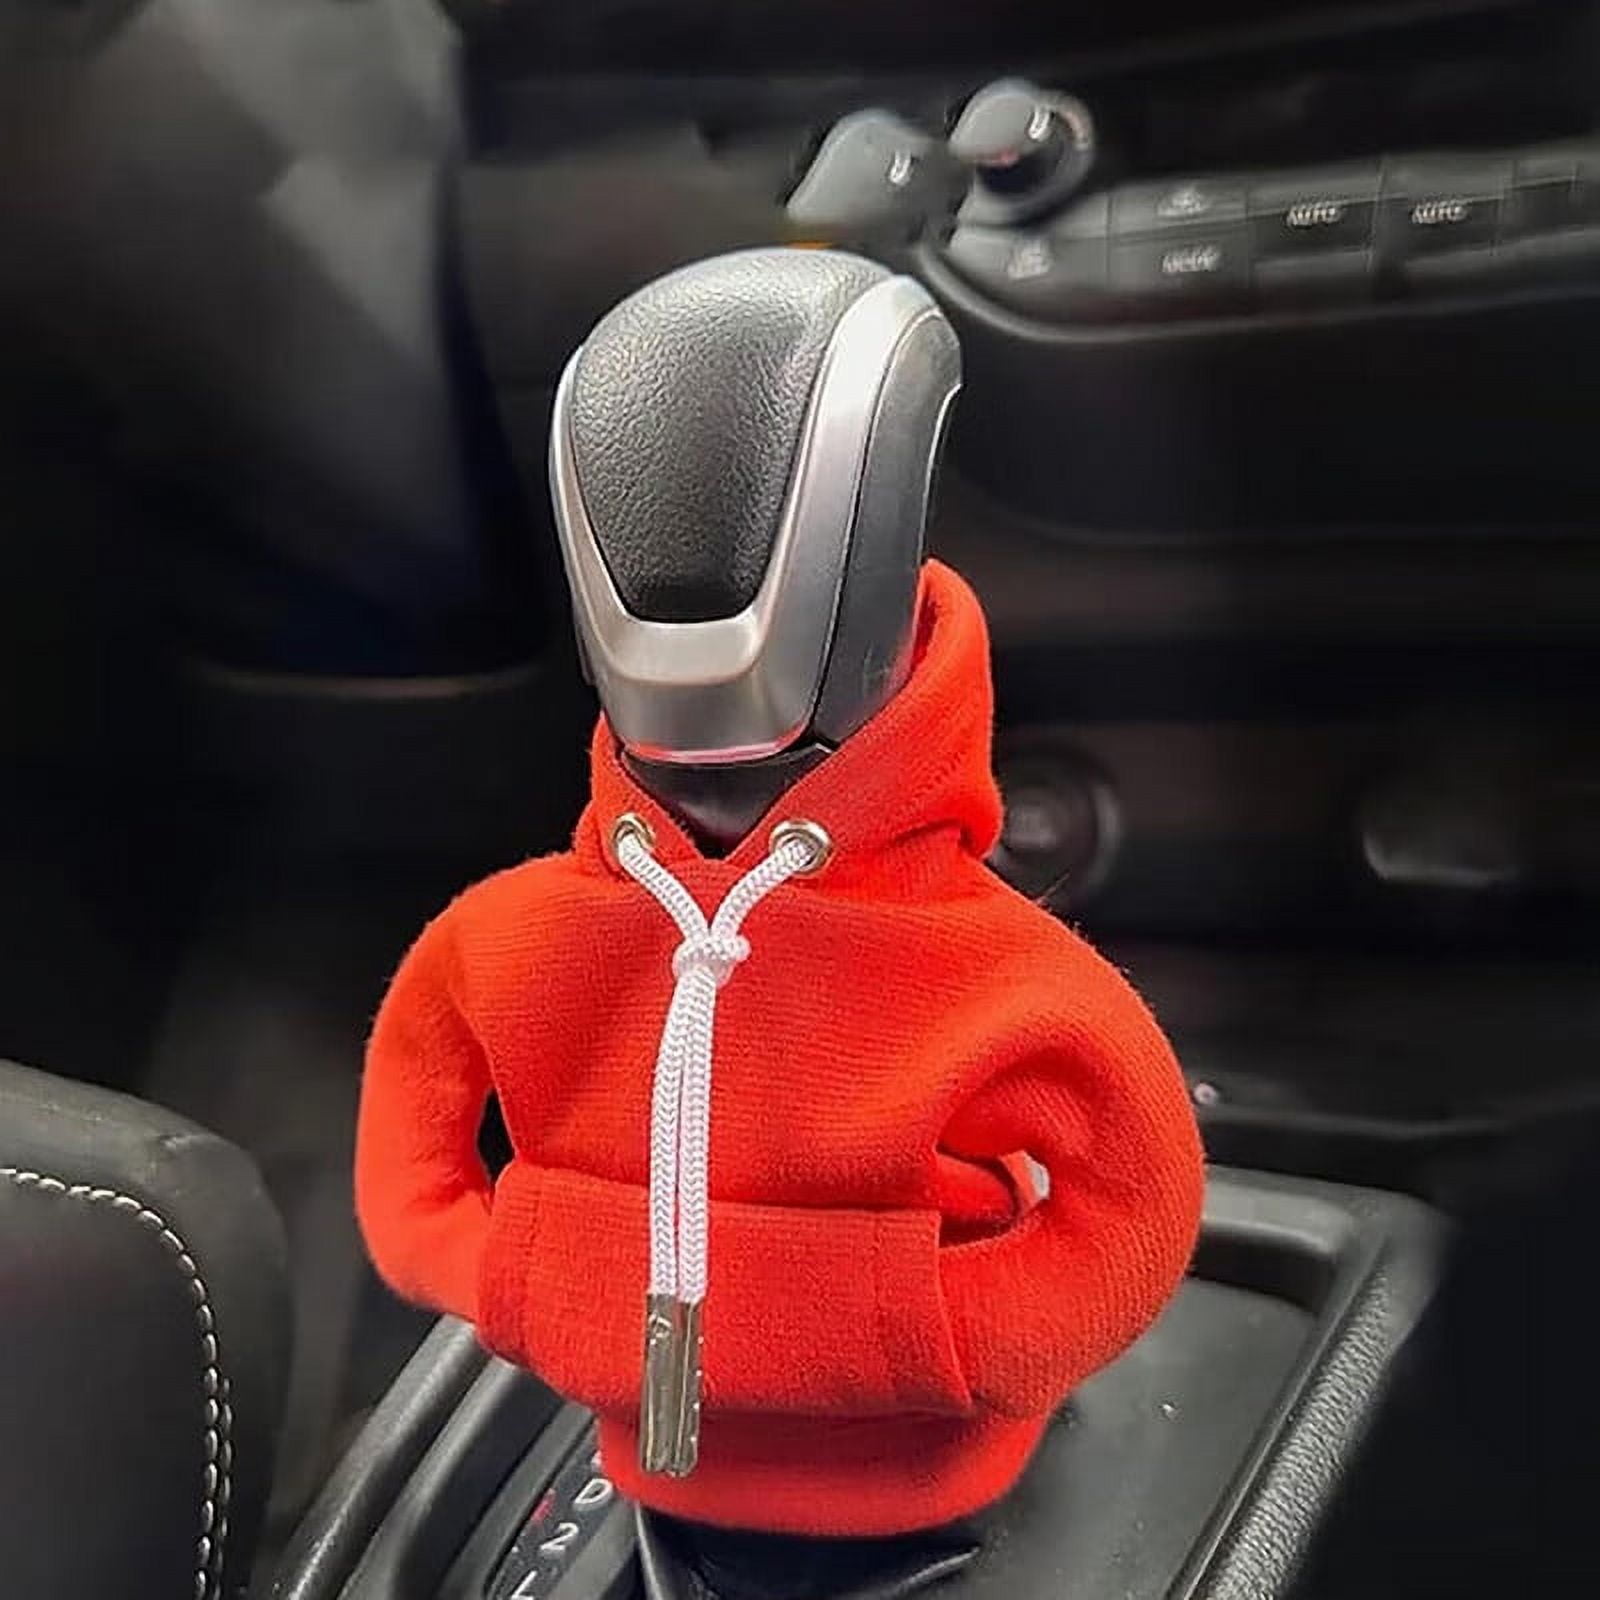 Gear Shift Hoodie, Universal Car Gear Shift Knob Cover, Funny Sweater  Shifter Hoodie, 4.7 Inch Gear Stick Hoodie Protector